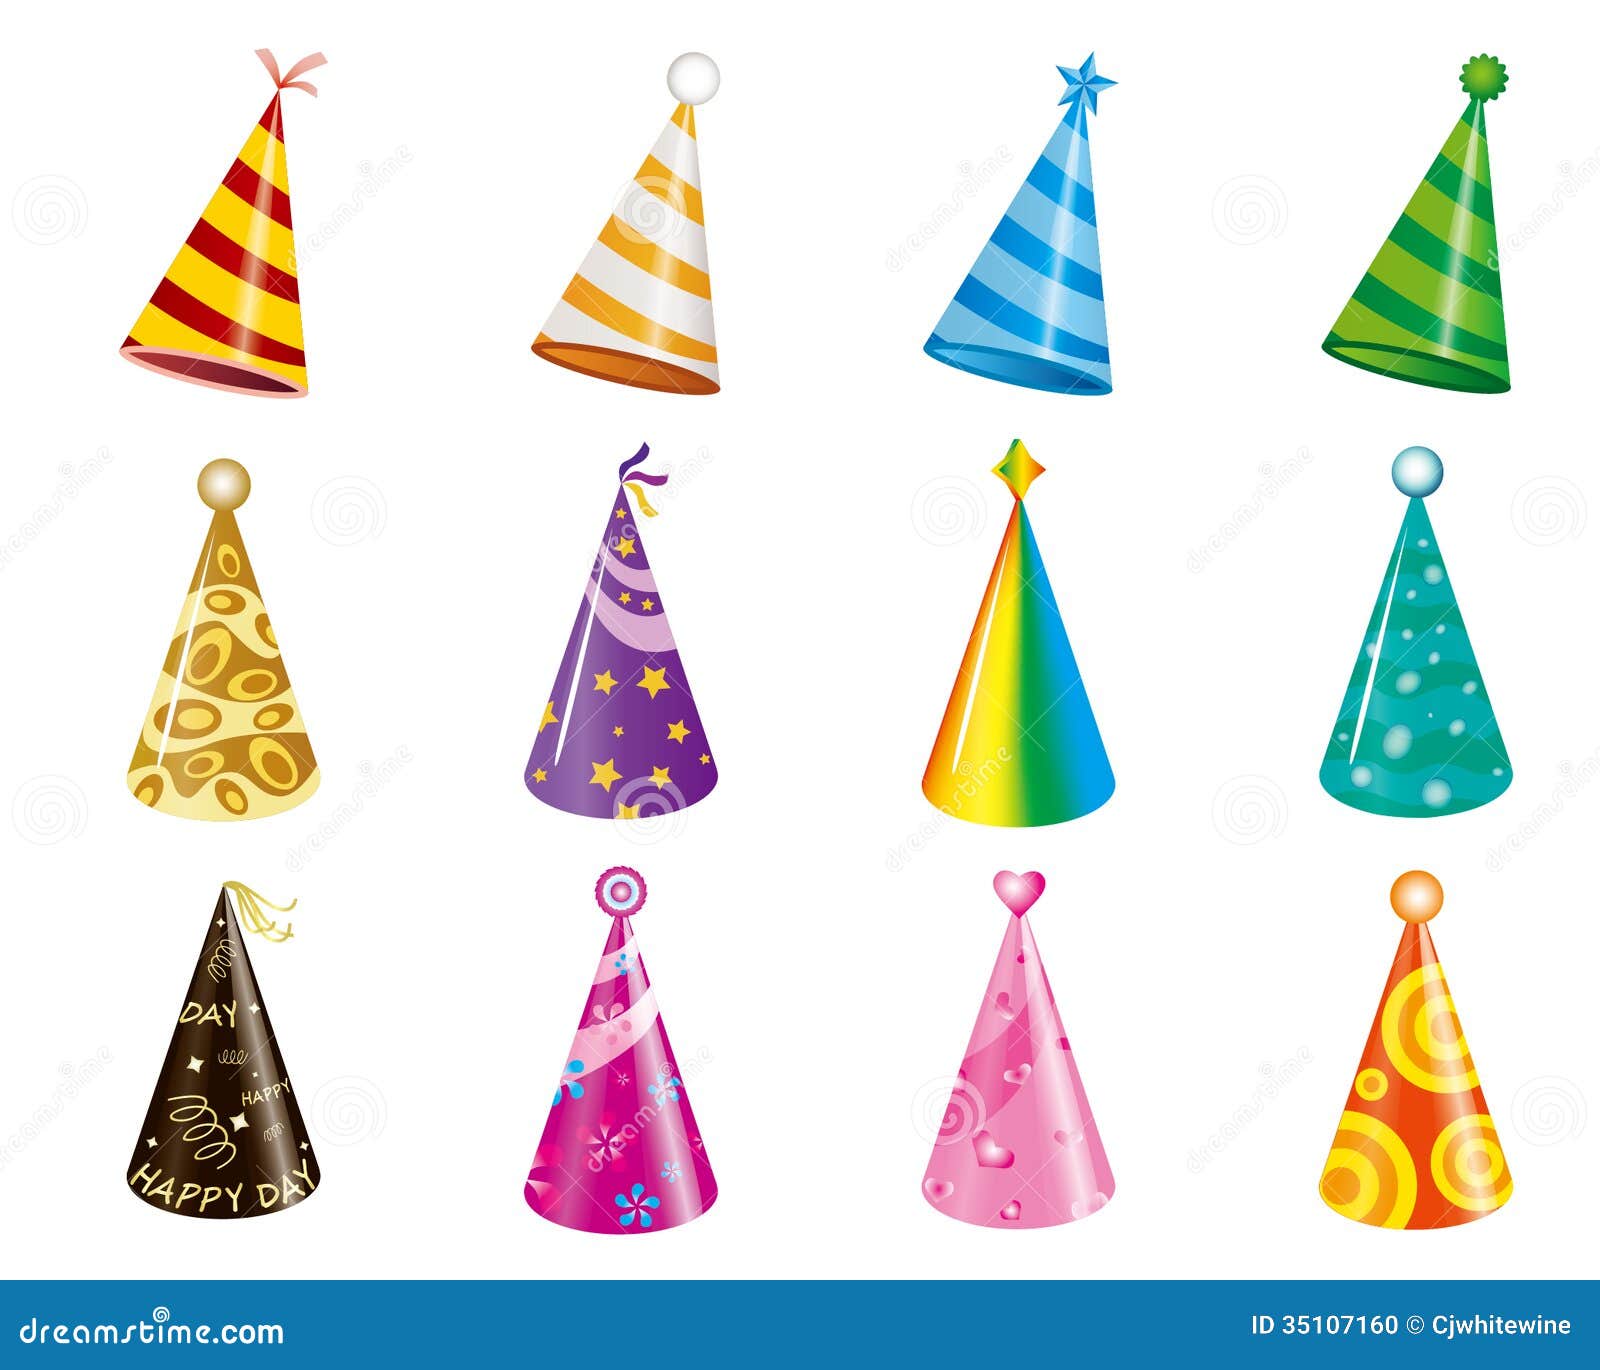 new years party hat clipart - photo #25